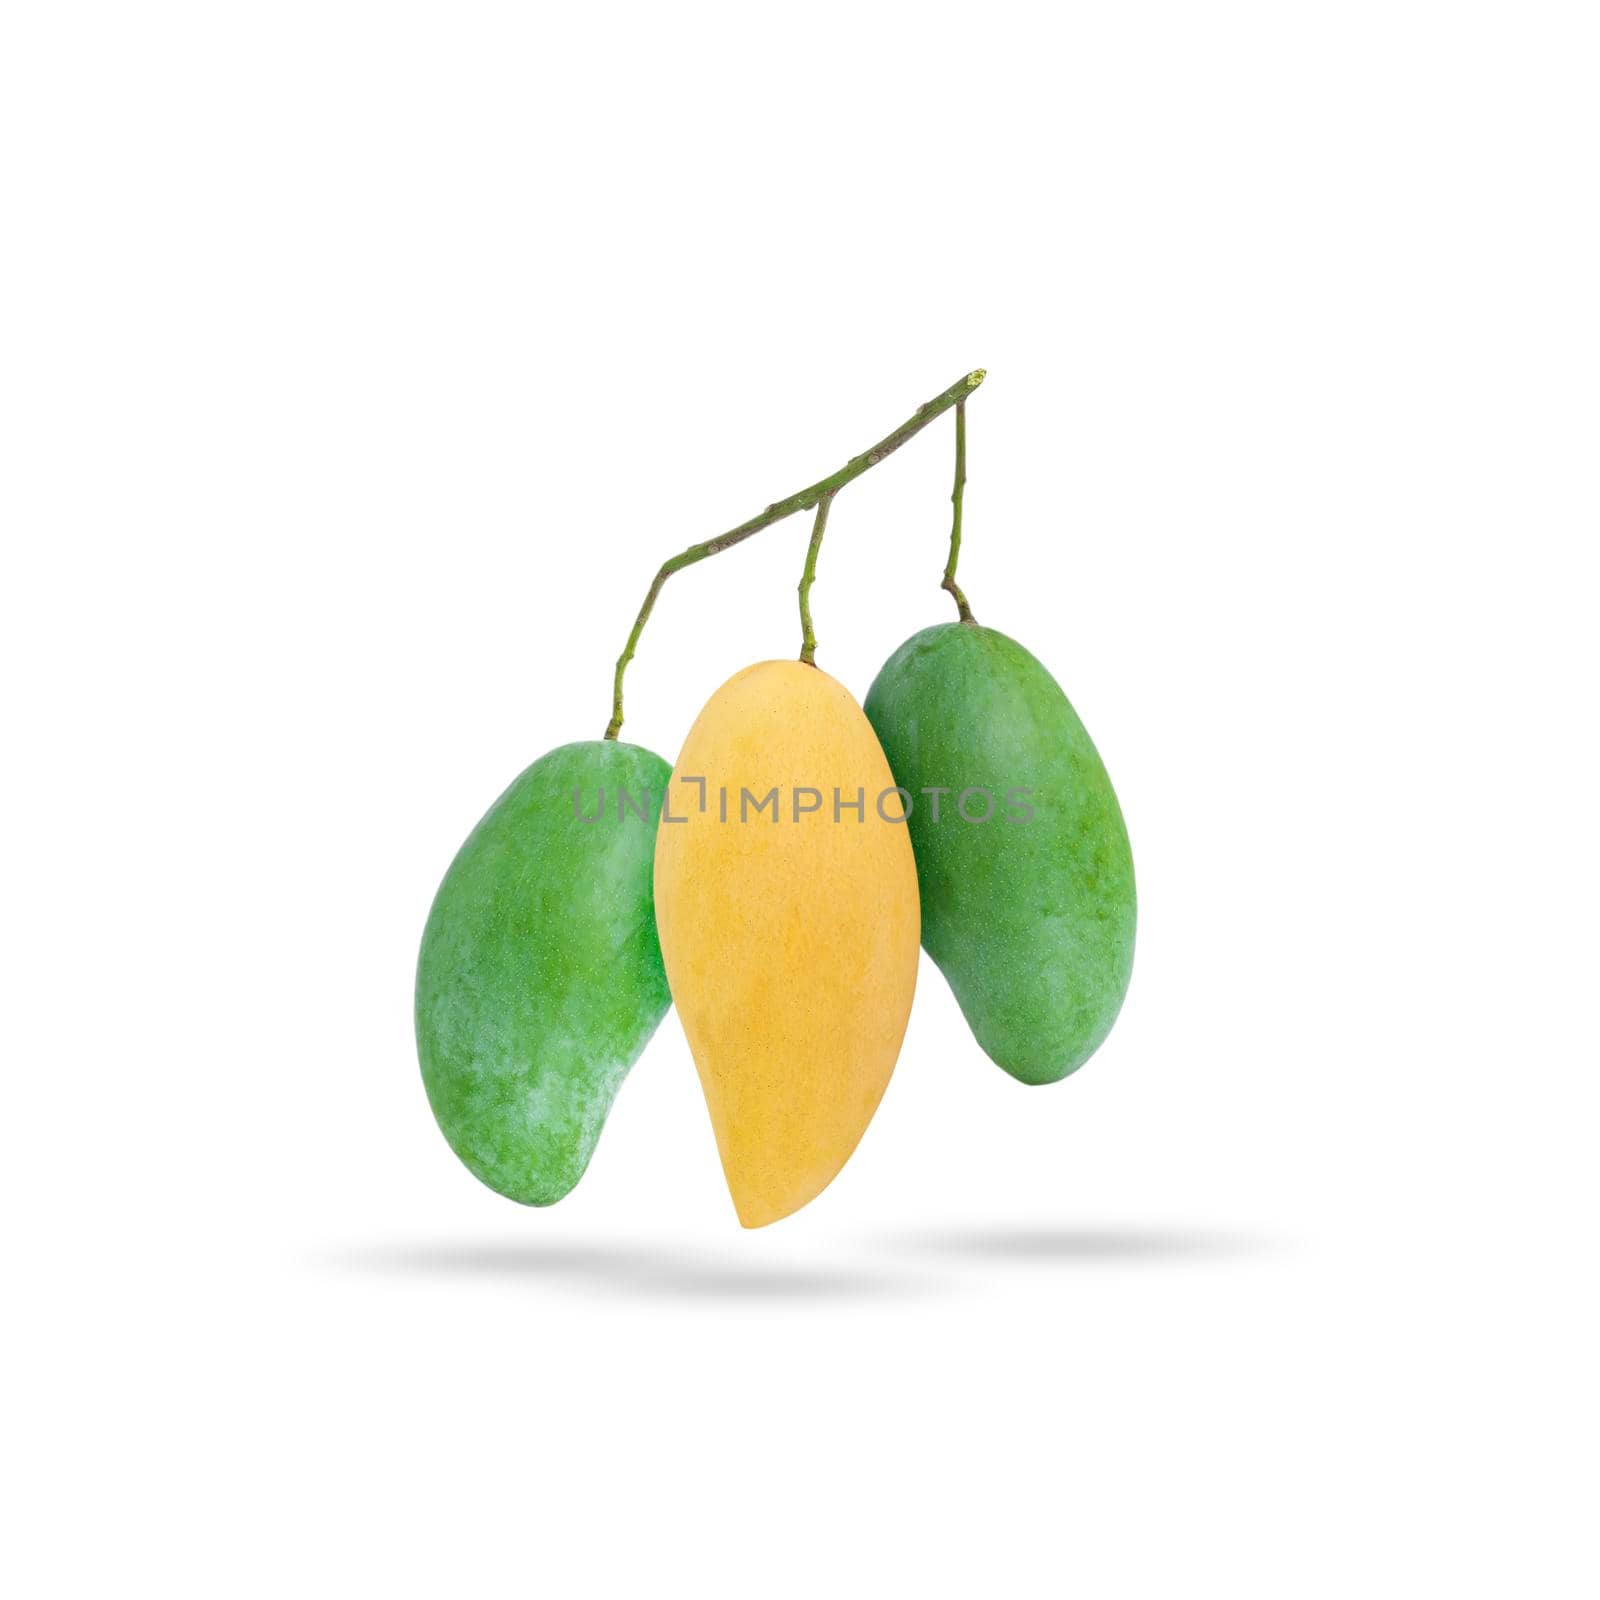 Yellow ripe mango and green raw mango in the same branch on white background by wattanaphob